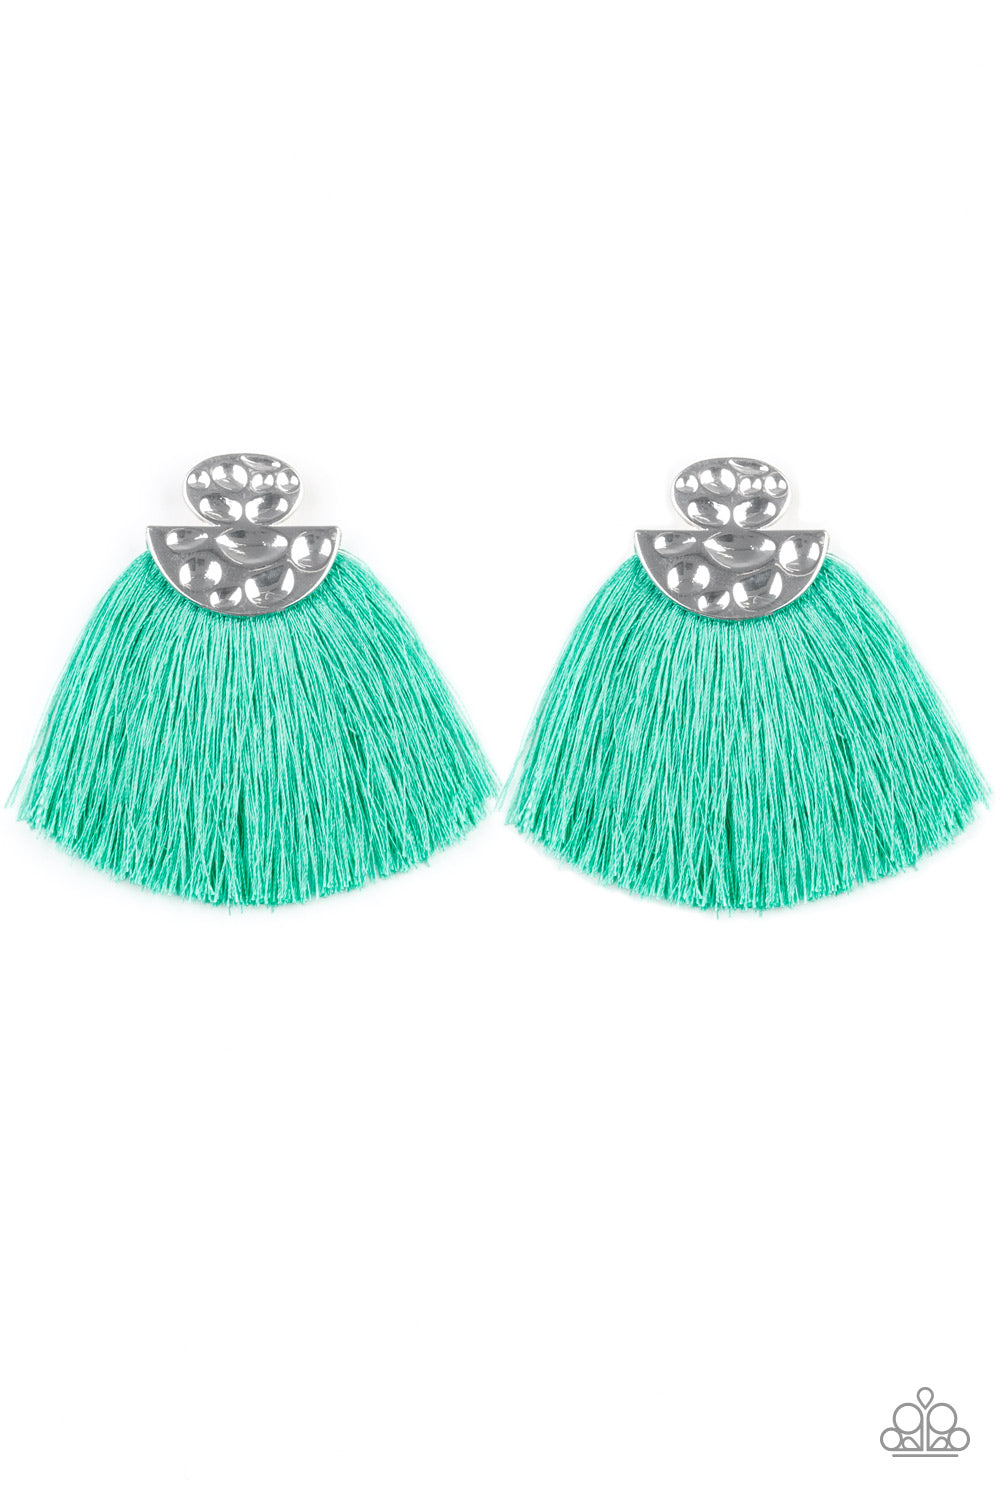 Paparazzi Accessories Make Some Plume - Green Earrings - Lady T Accessories